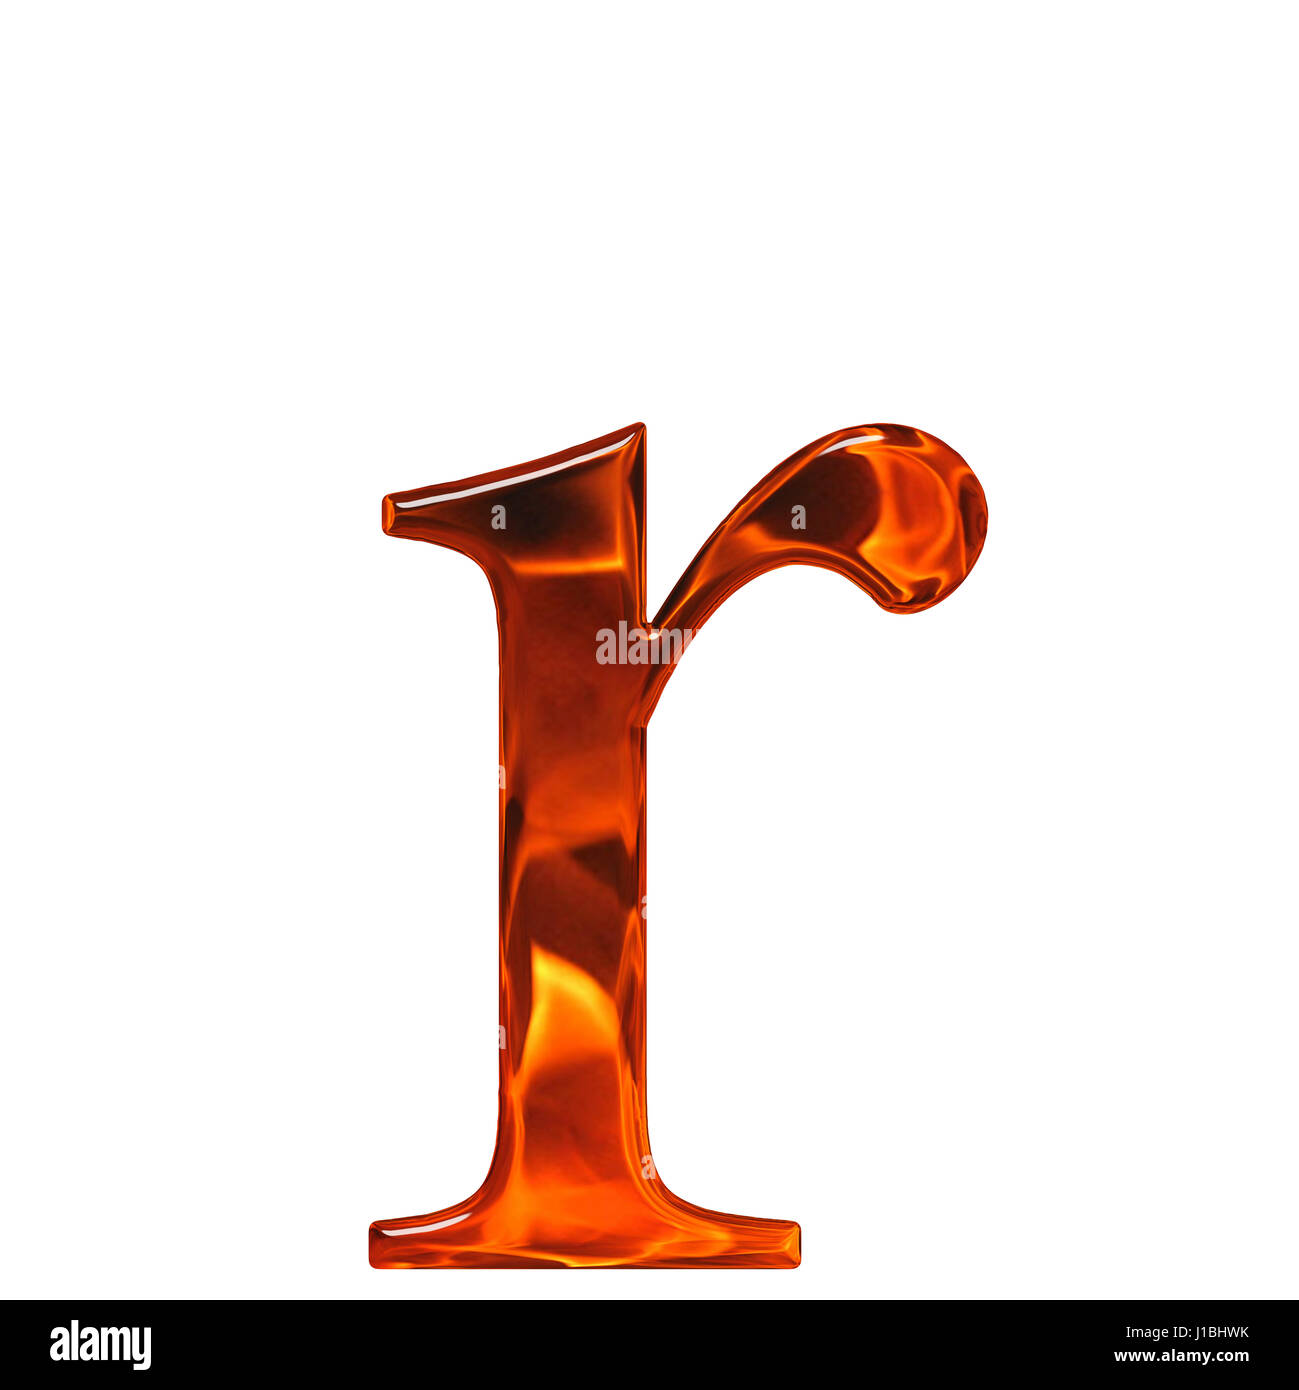 Lowercase letter r - the extruded of glass with pattern flame, isolated on white background Stock Photo